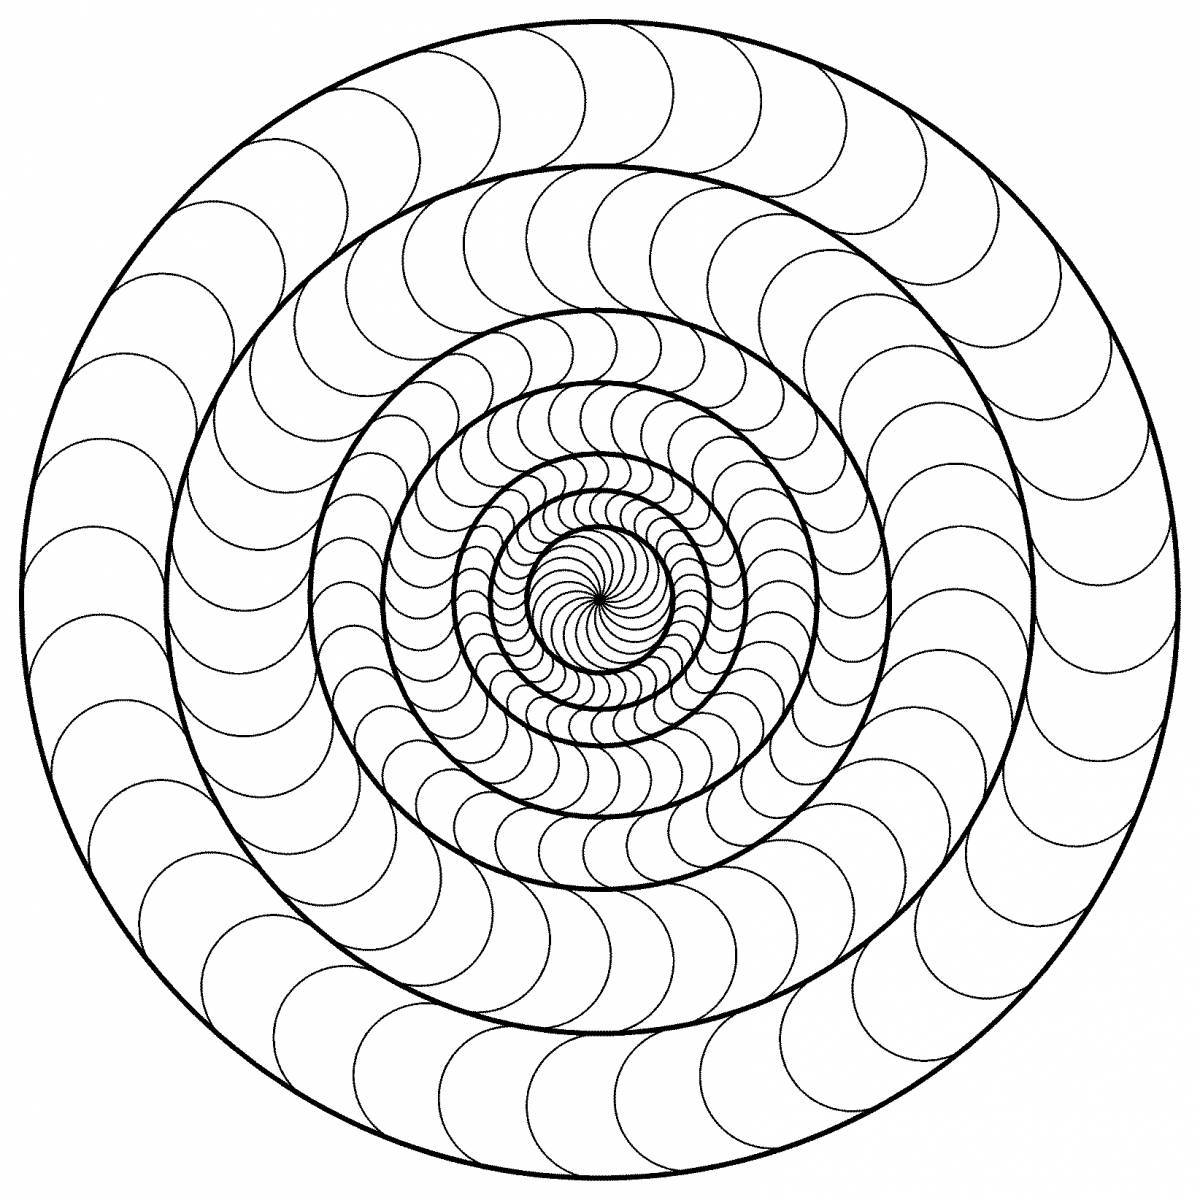 Beautiful coloring in a circle in a spiral